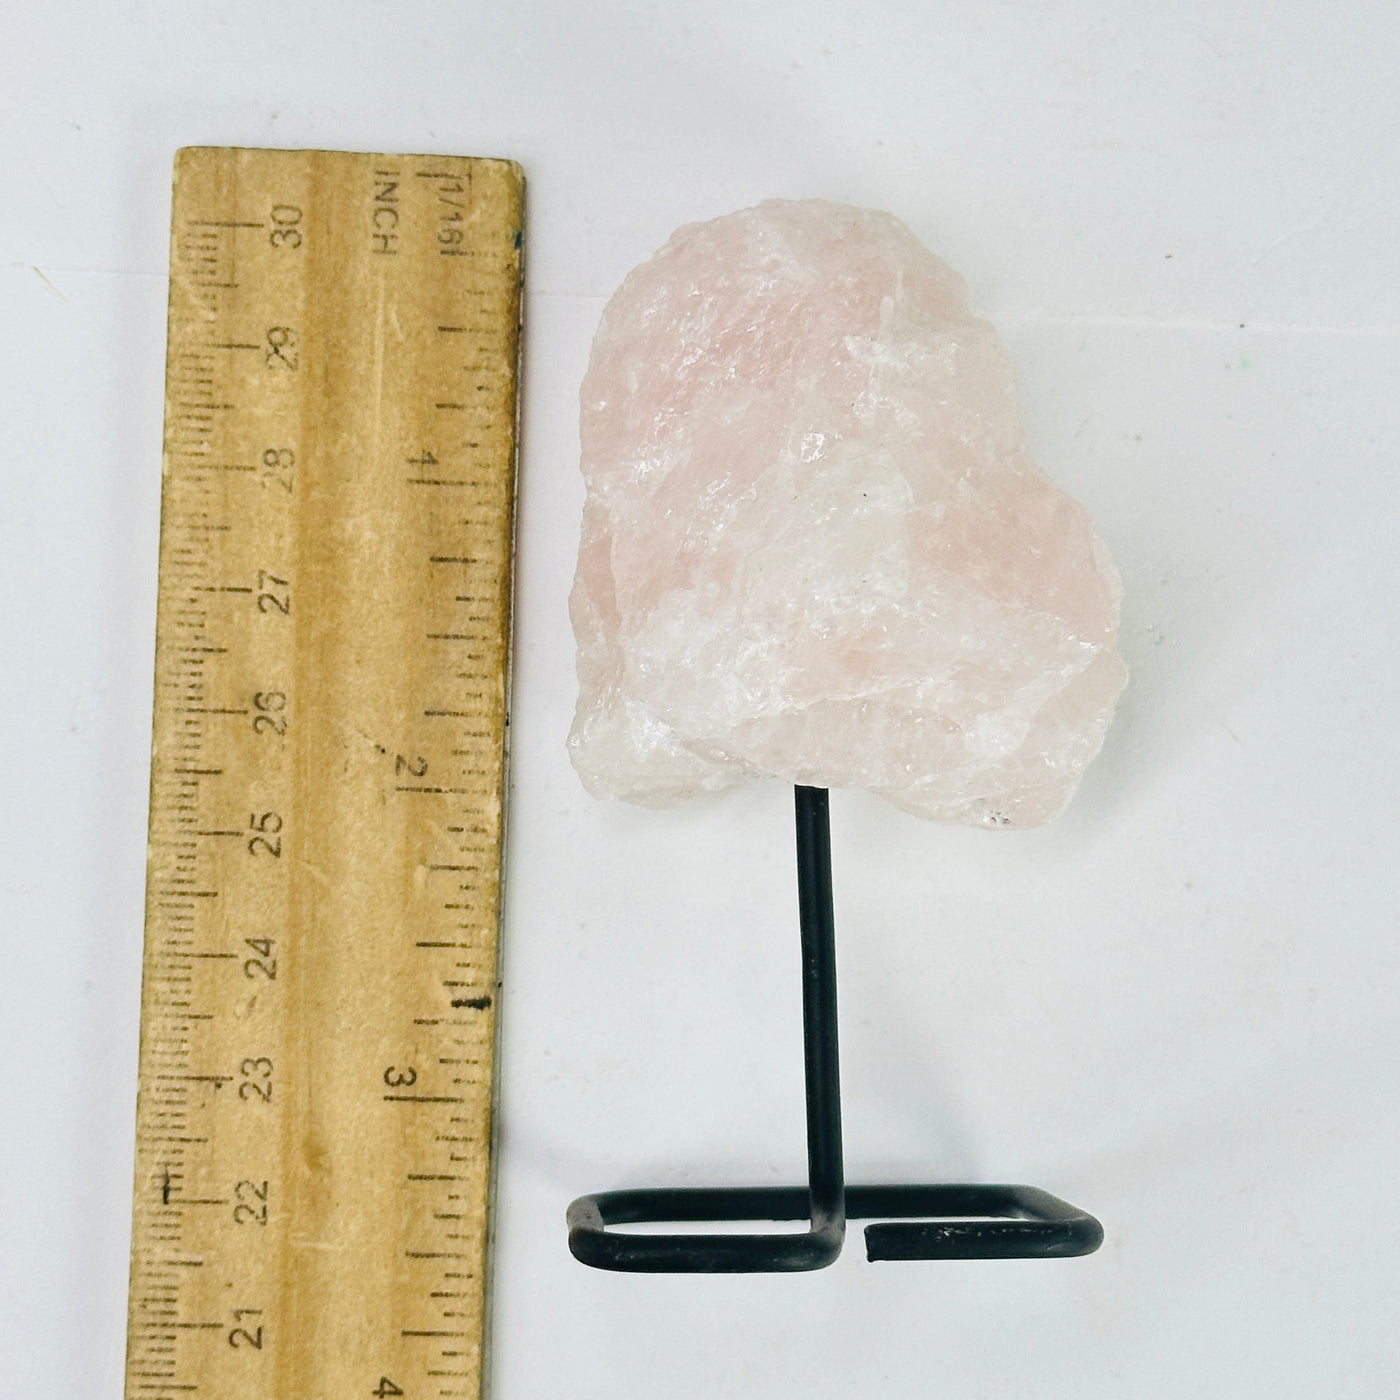 Rose quartz on metal stand next to a ruler for size reference